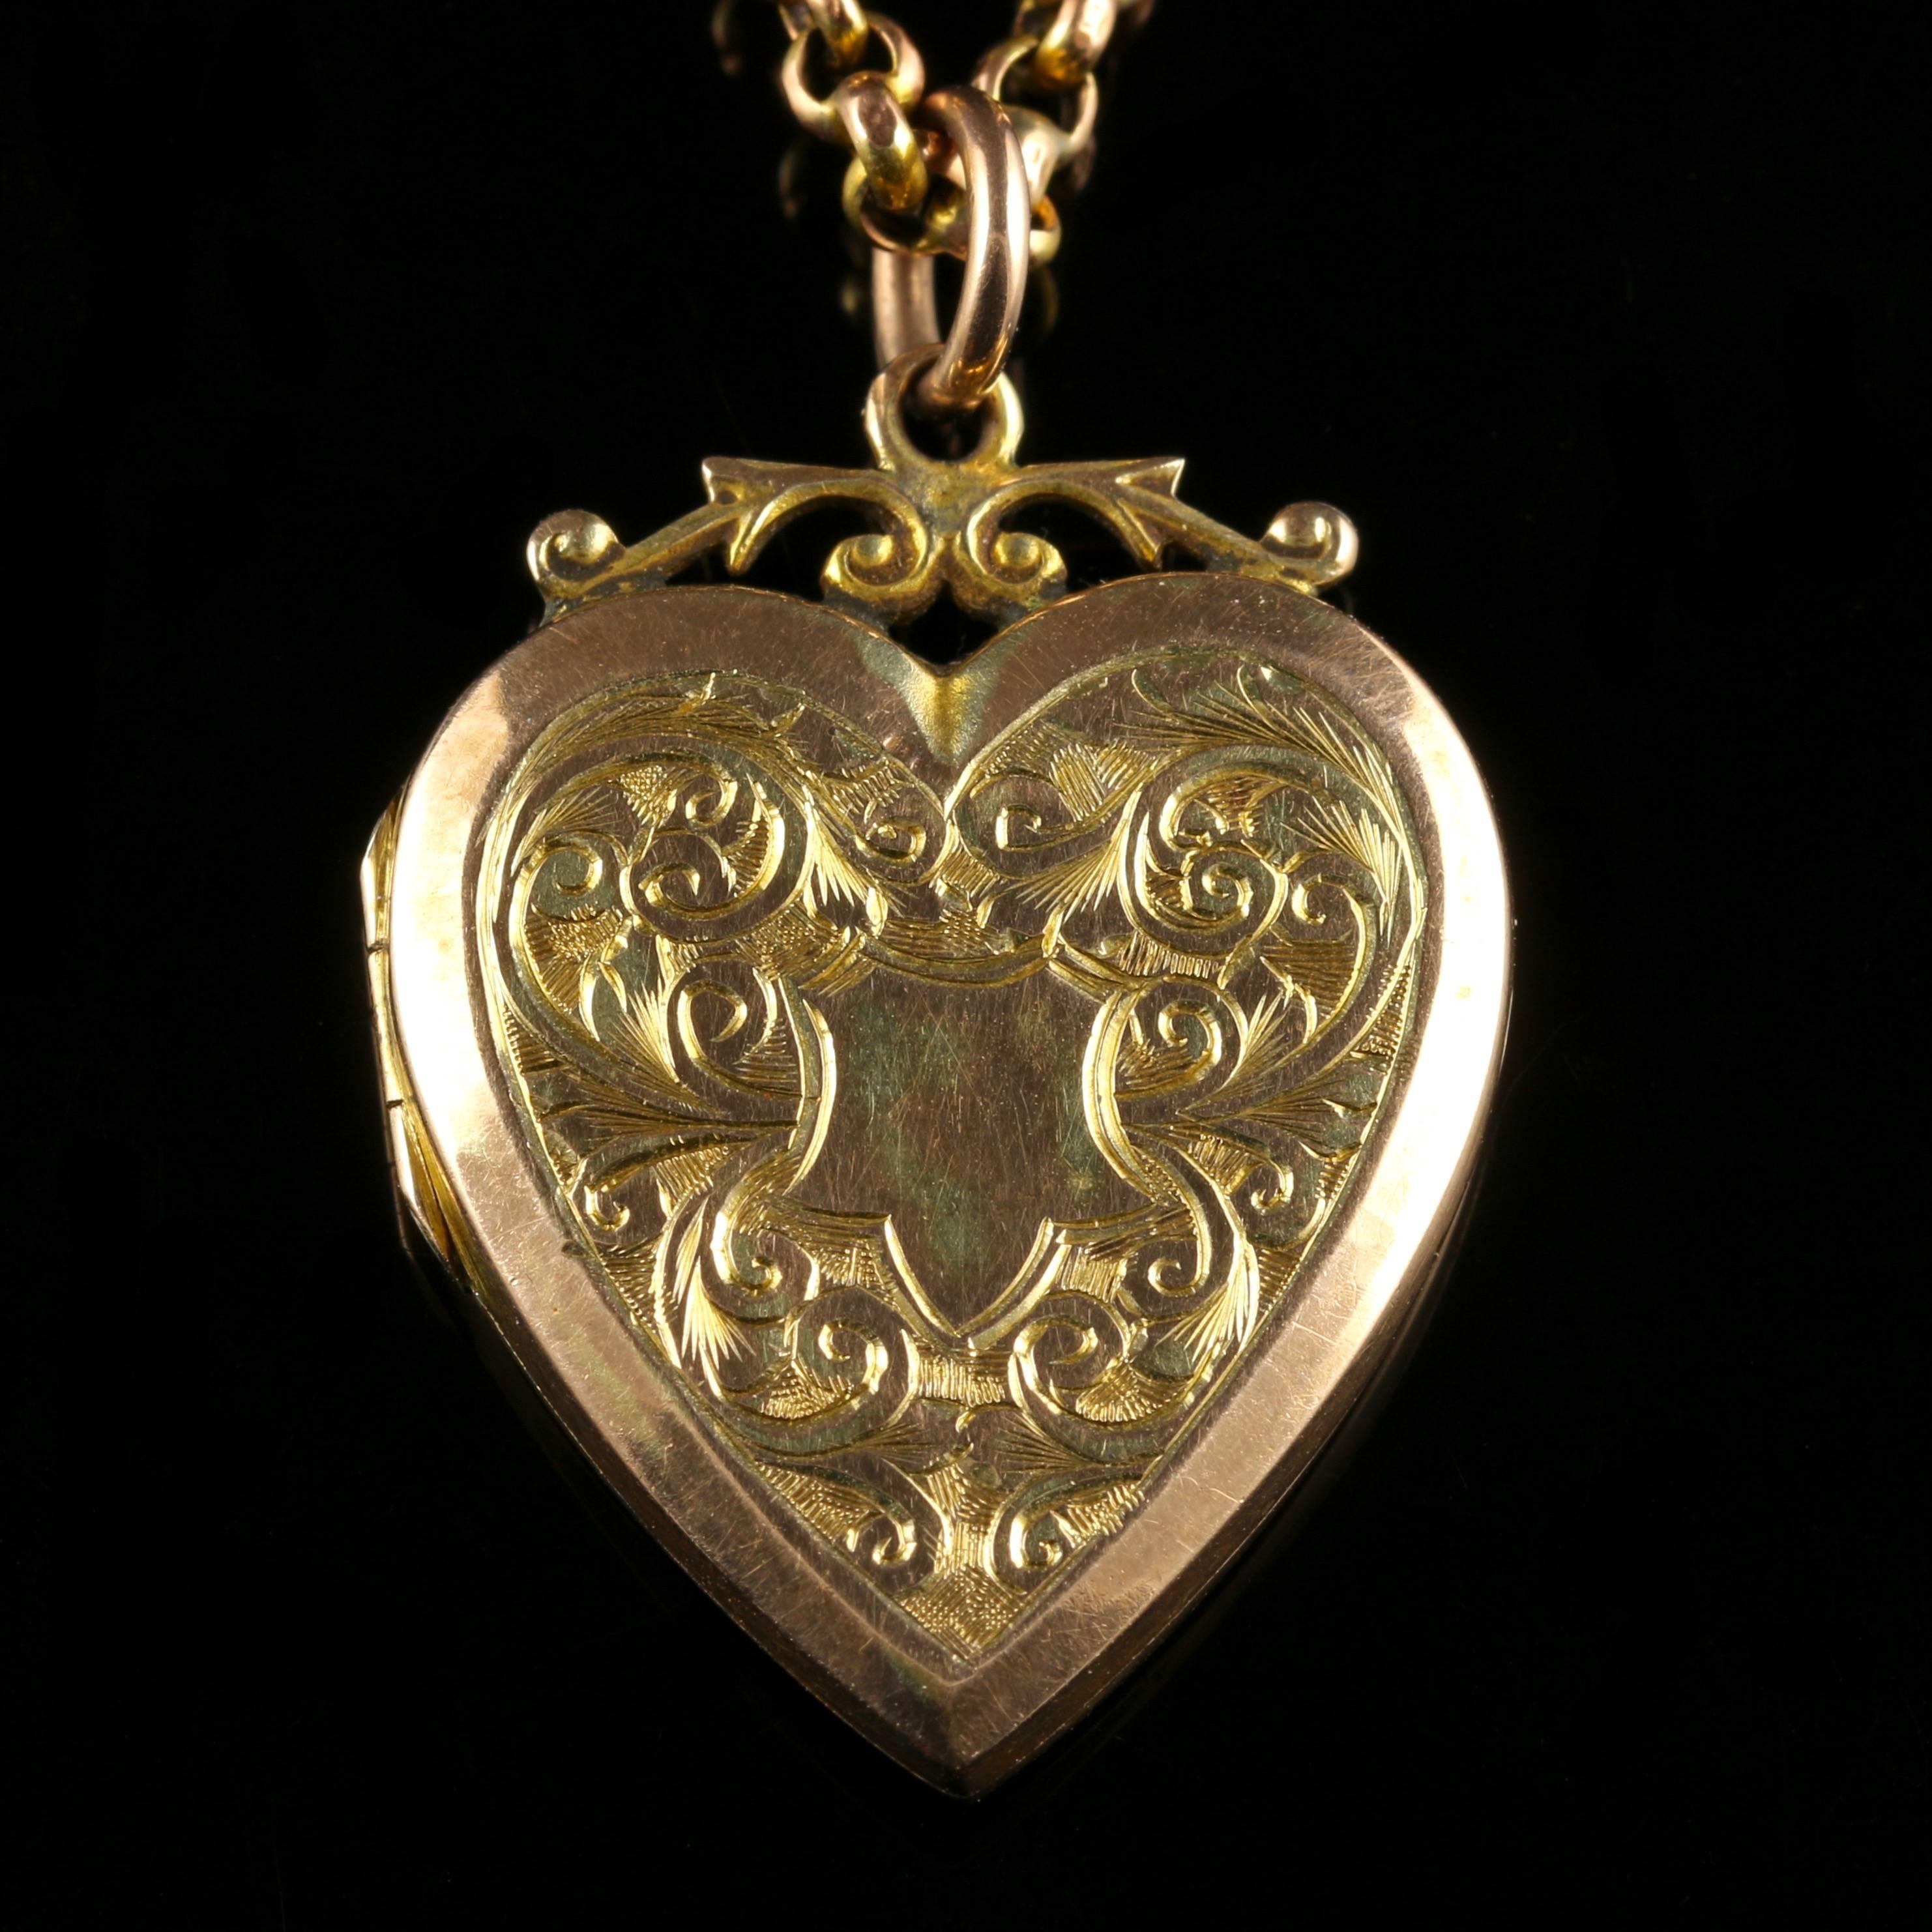 This fabulous Antique Victorian 9ct Gold heart locket is set on a lovely chain.

Circa 1900.

The lovely heart locket is set with beautiful engraving on both sides. 

The locket is hallmarked 9ct Gold back and front, the chain is 9ct Gold also.